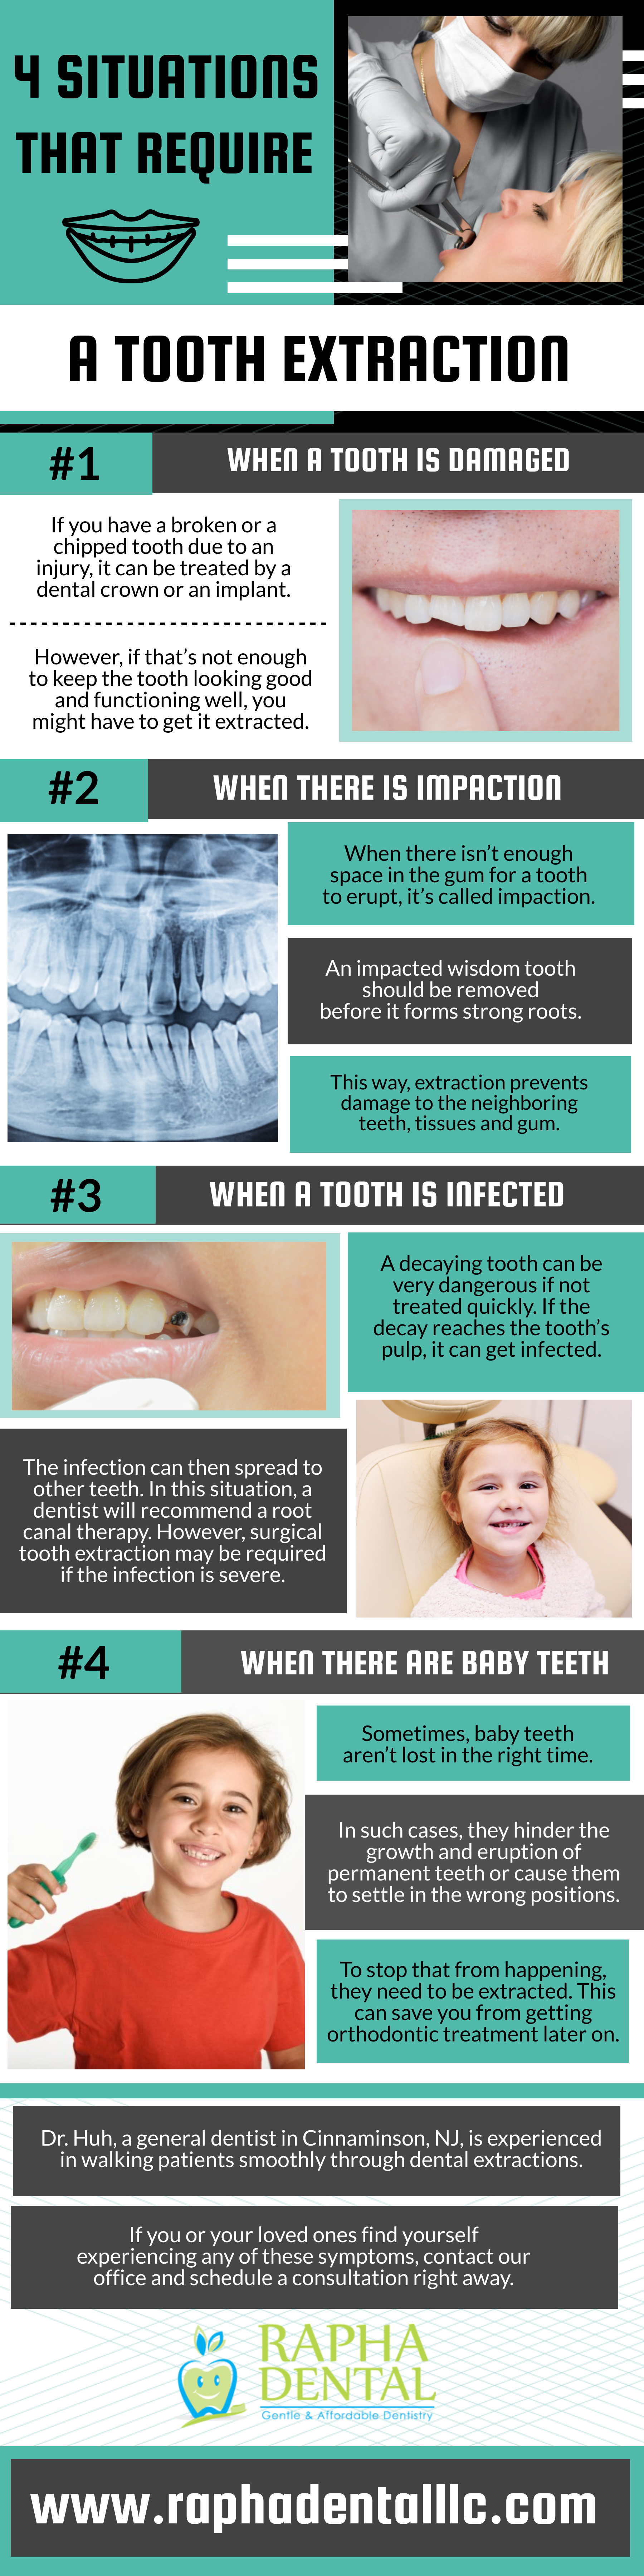 4 Situations that require a Tooth Extraction